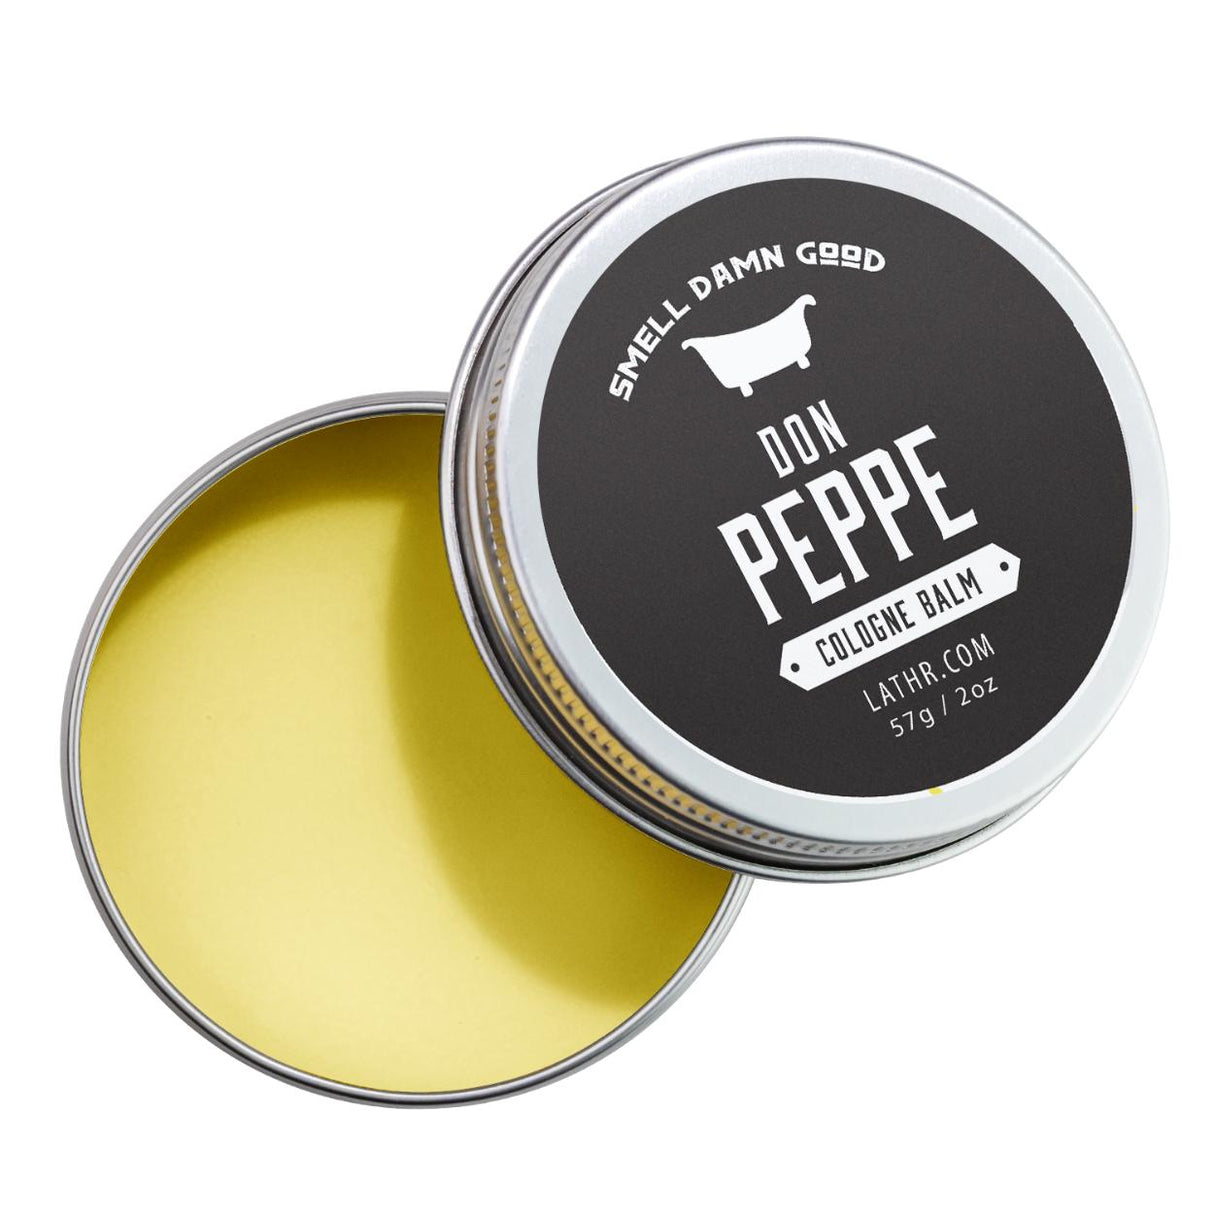 Solid Cologne DON PEPPE